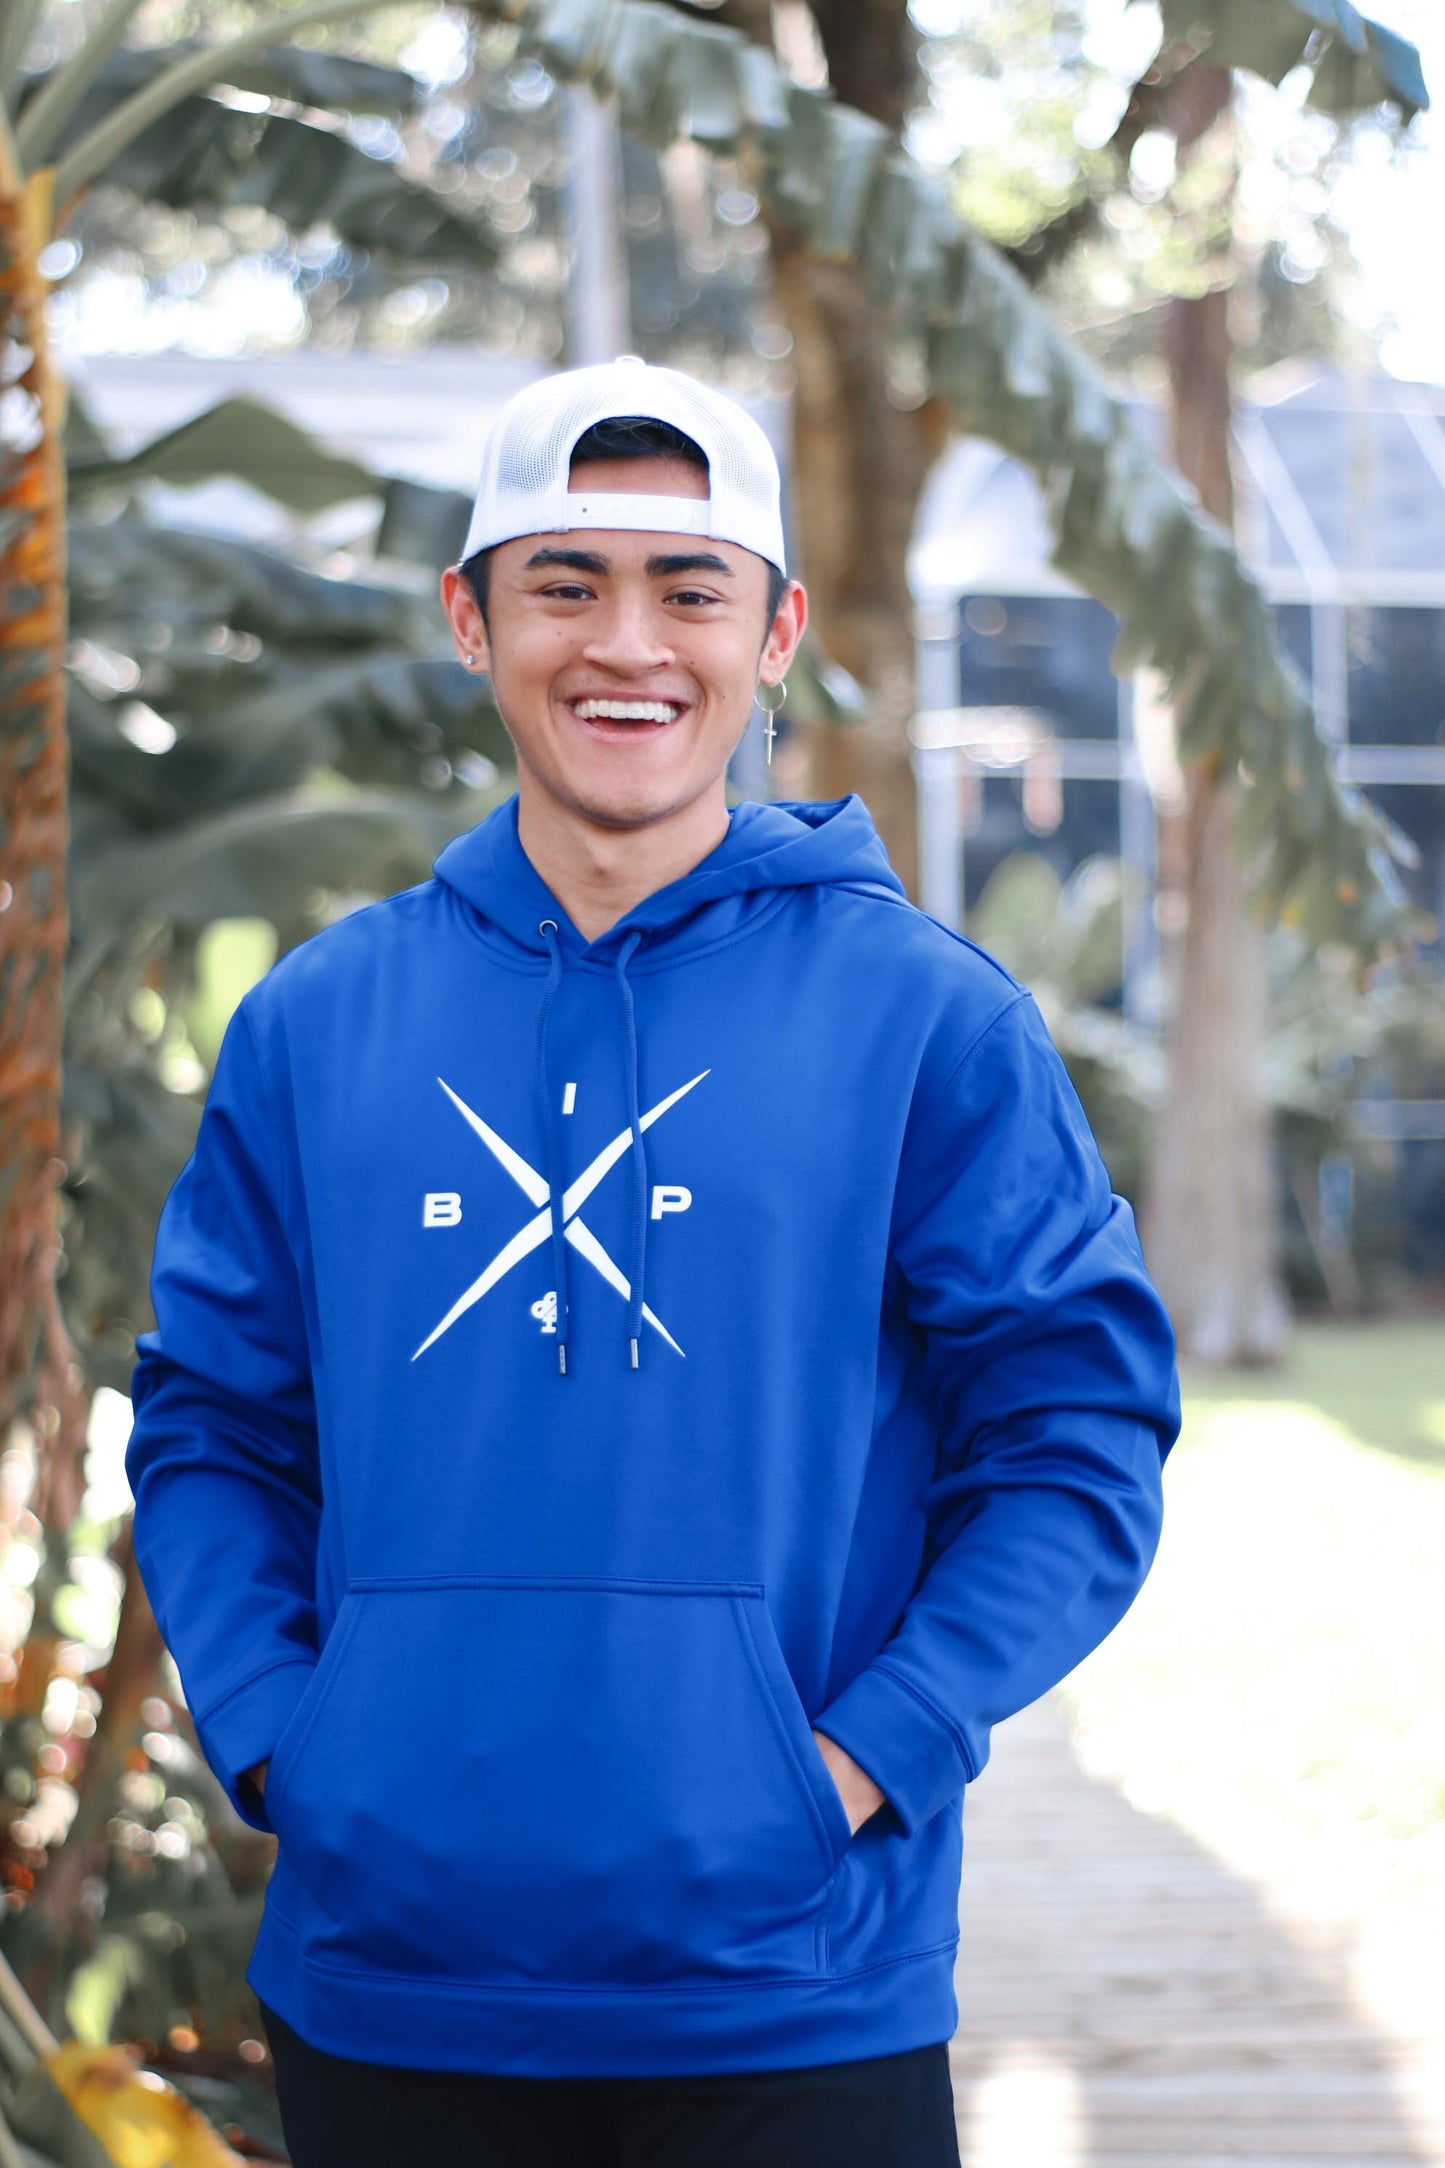 X logo 2.0 - printed on a Royal Blue Premium Dry Fit hoodie by Ireland Boys productions viral youtube channel featuring Ricky Ireland